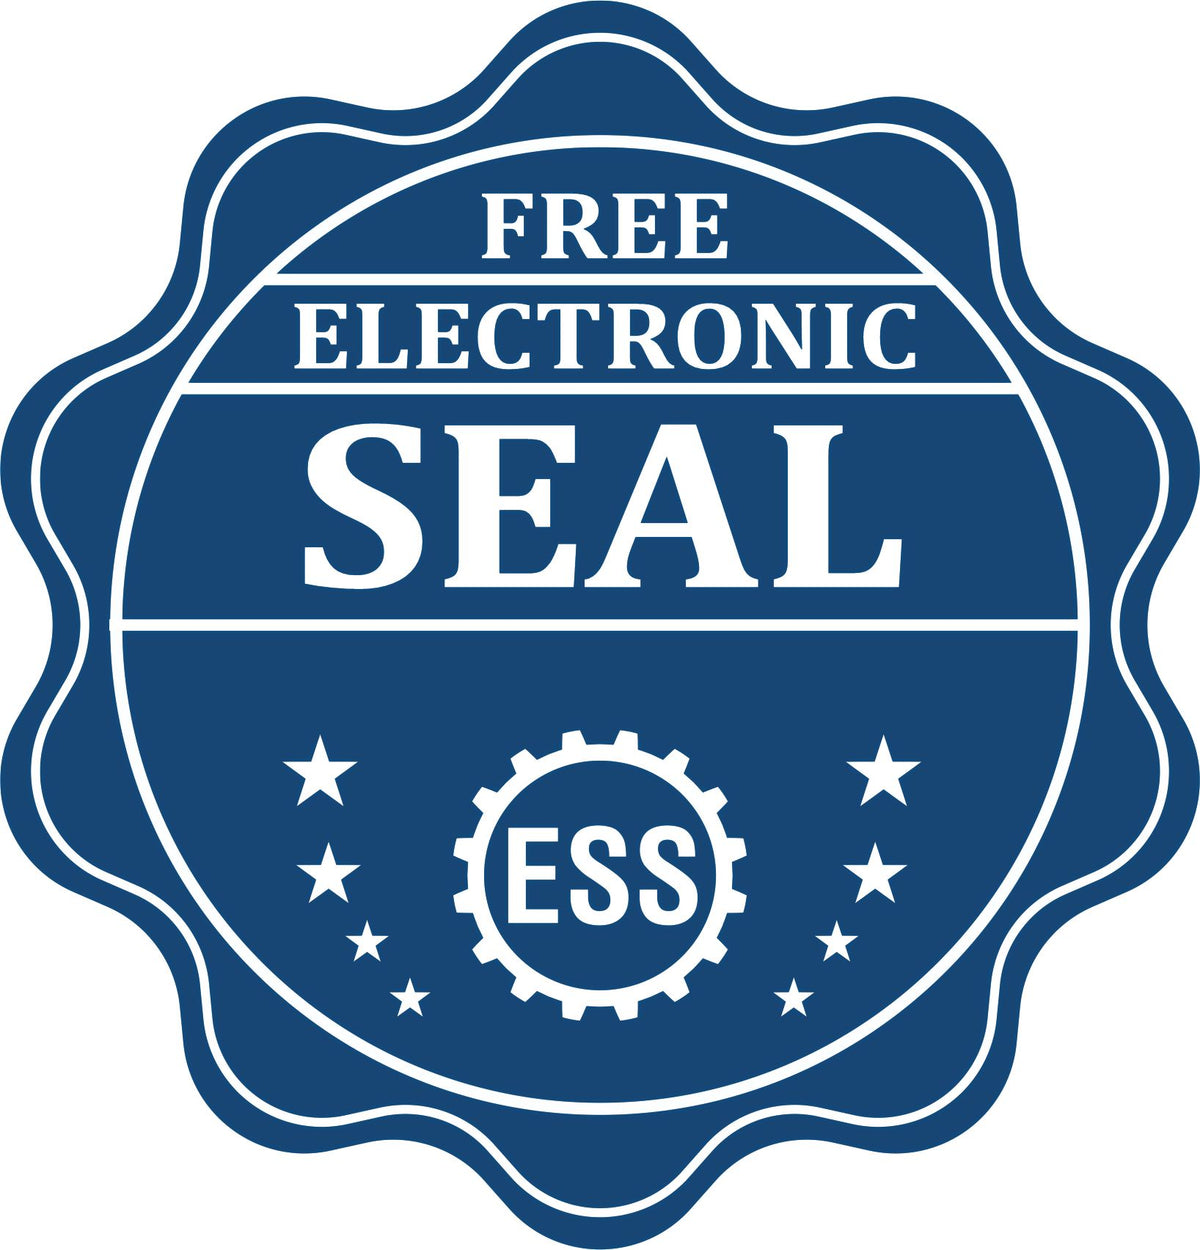 A badge showing a free electronic seal for the Handheld Kansas Architect Seal Embosser with stars and the ESS gear on the emblem.